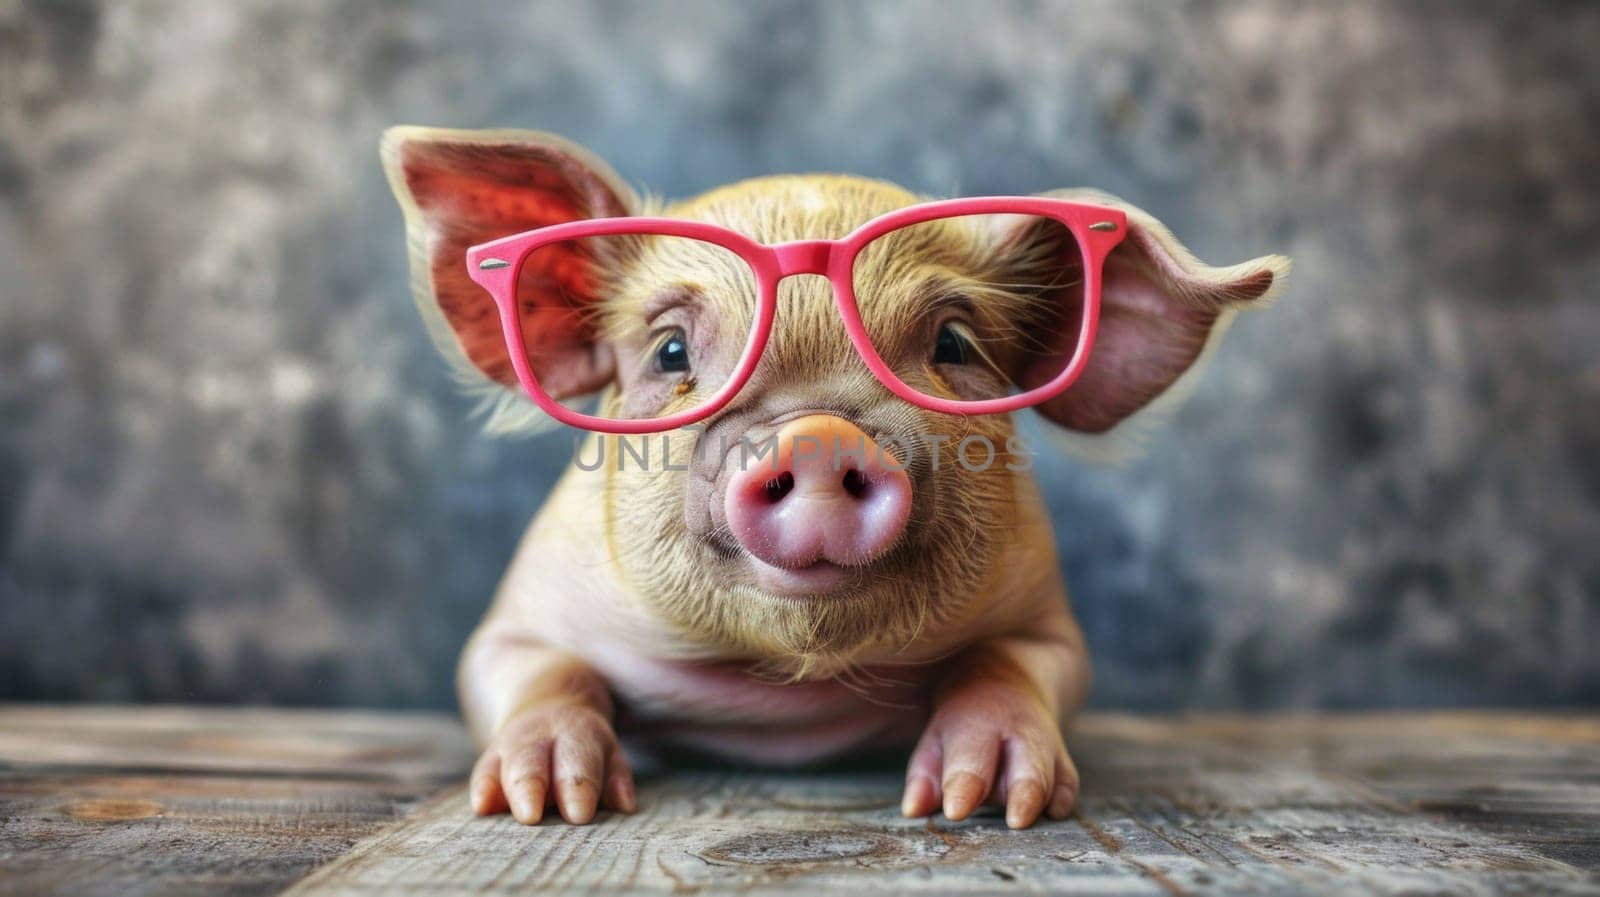 A pig wearing pink glasses sitting on a wooden table, AI by starush